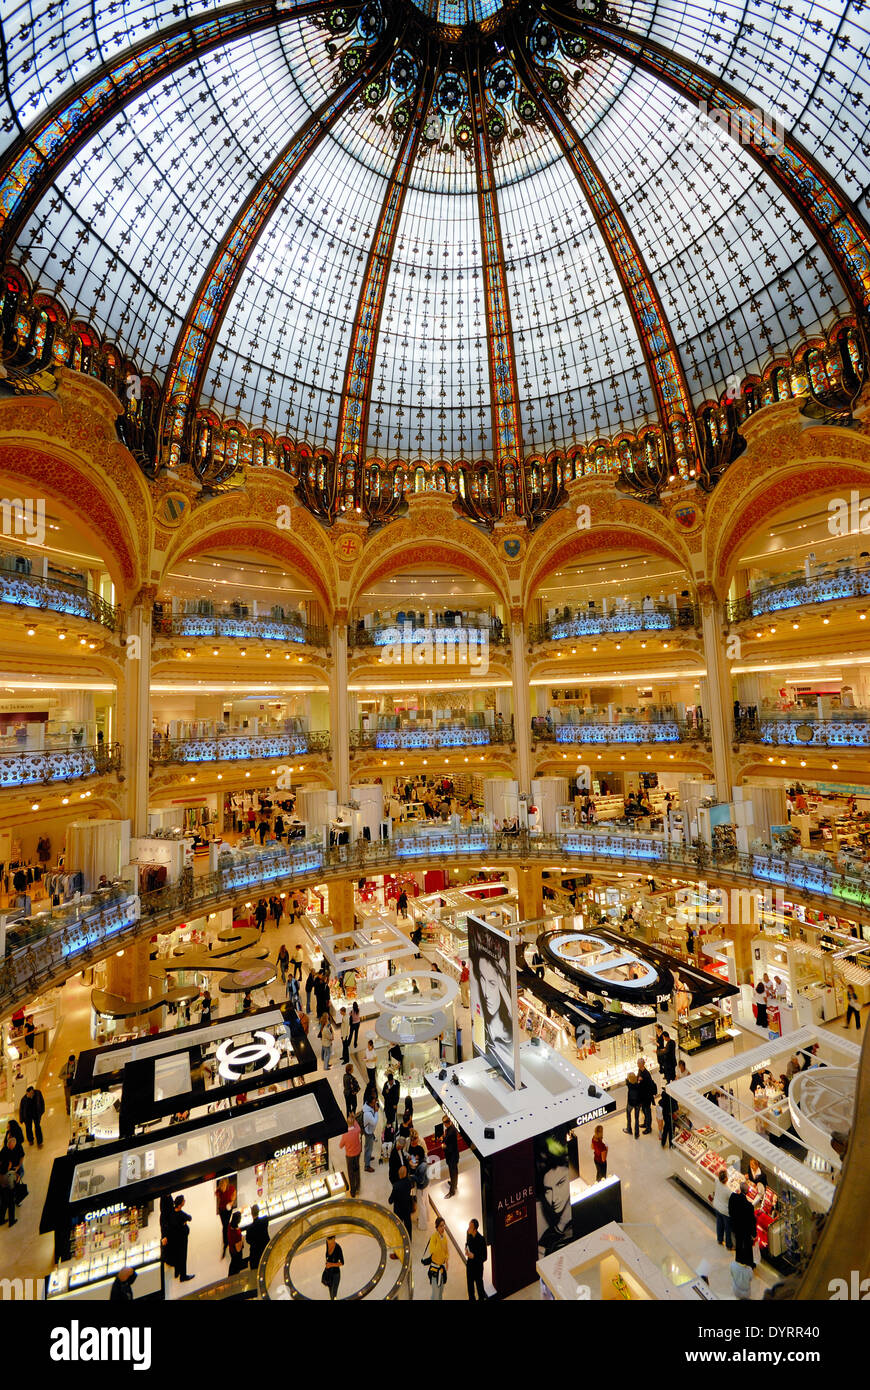 Galeries Lafayette Shopping Mall Paris France Stock Photo